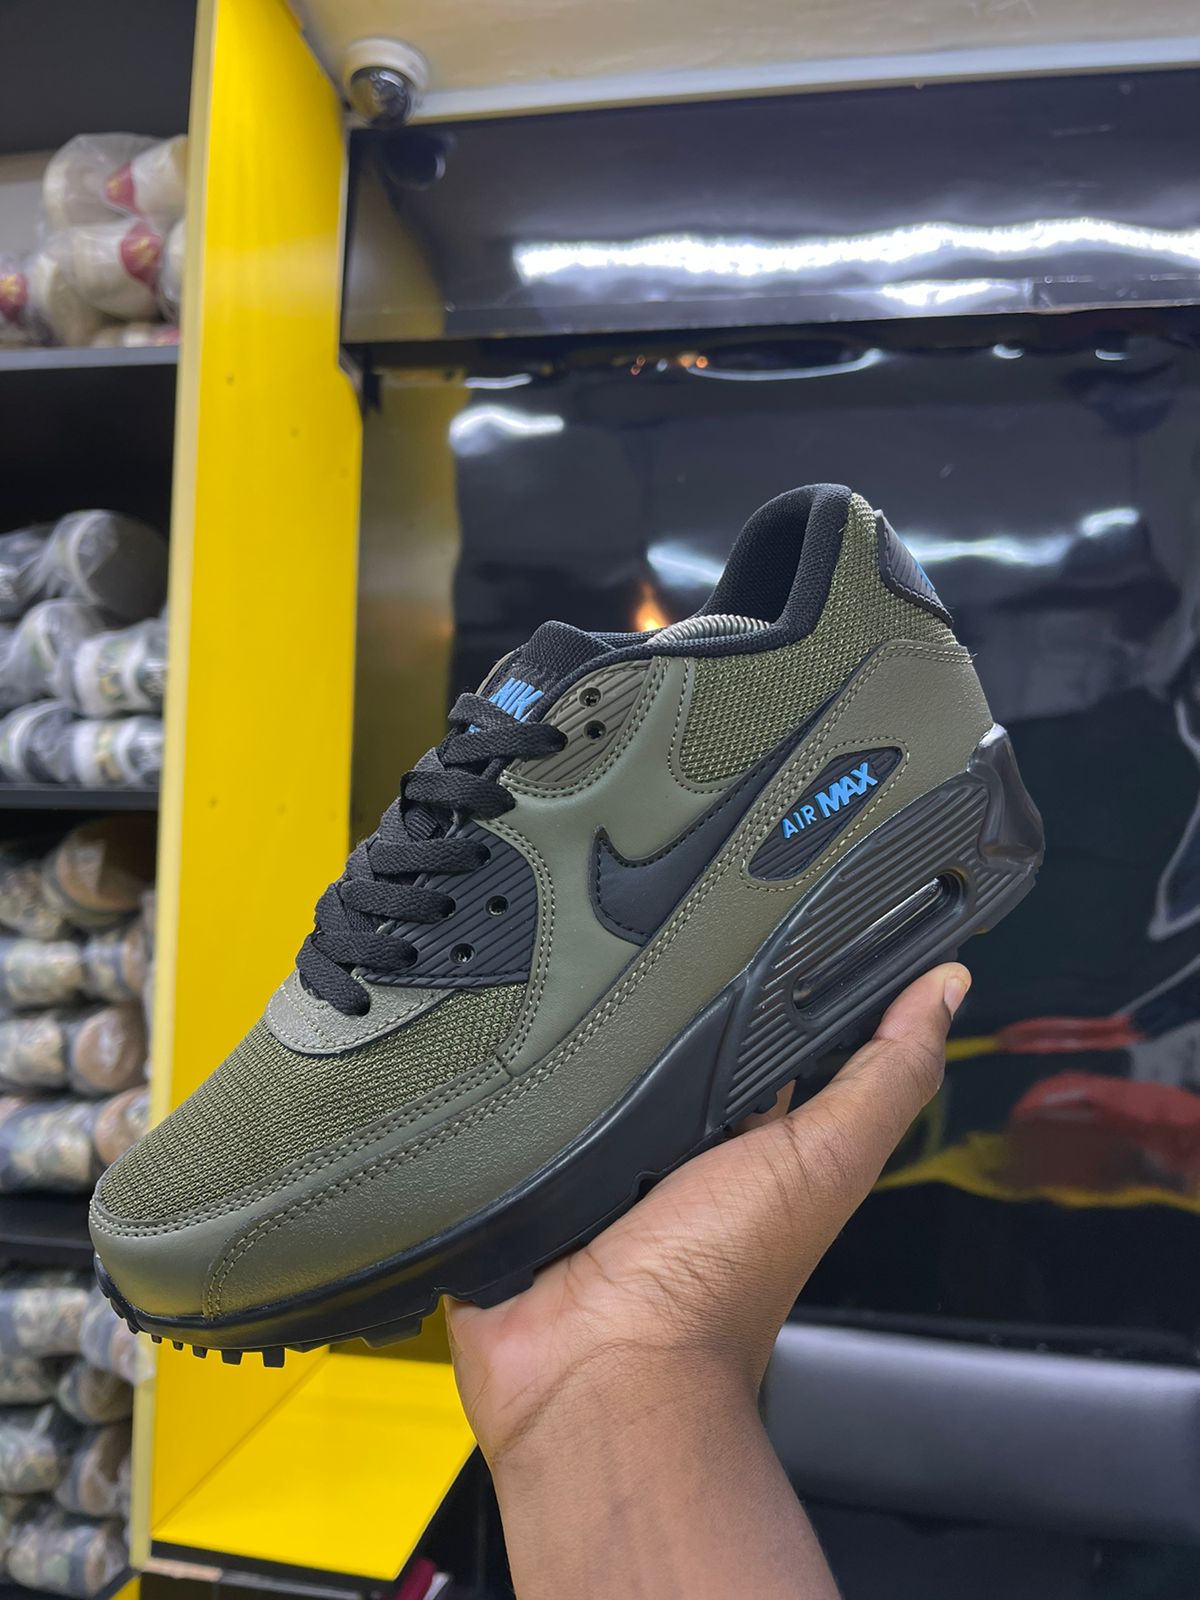 Escarchado federación cobre Mwacheezy Collection on Twitter: "Are you planning to grab the Nike Air Max  90 Essential 'Alligator Green' this weekend? Size 38 to 45 retailing at Ksh. 4200 #IkoKiatuKe https://t.co/Q5RYAGAS4R" / Twitter